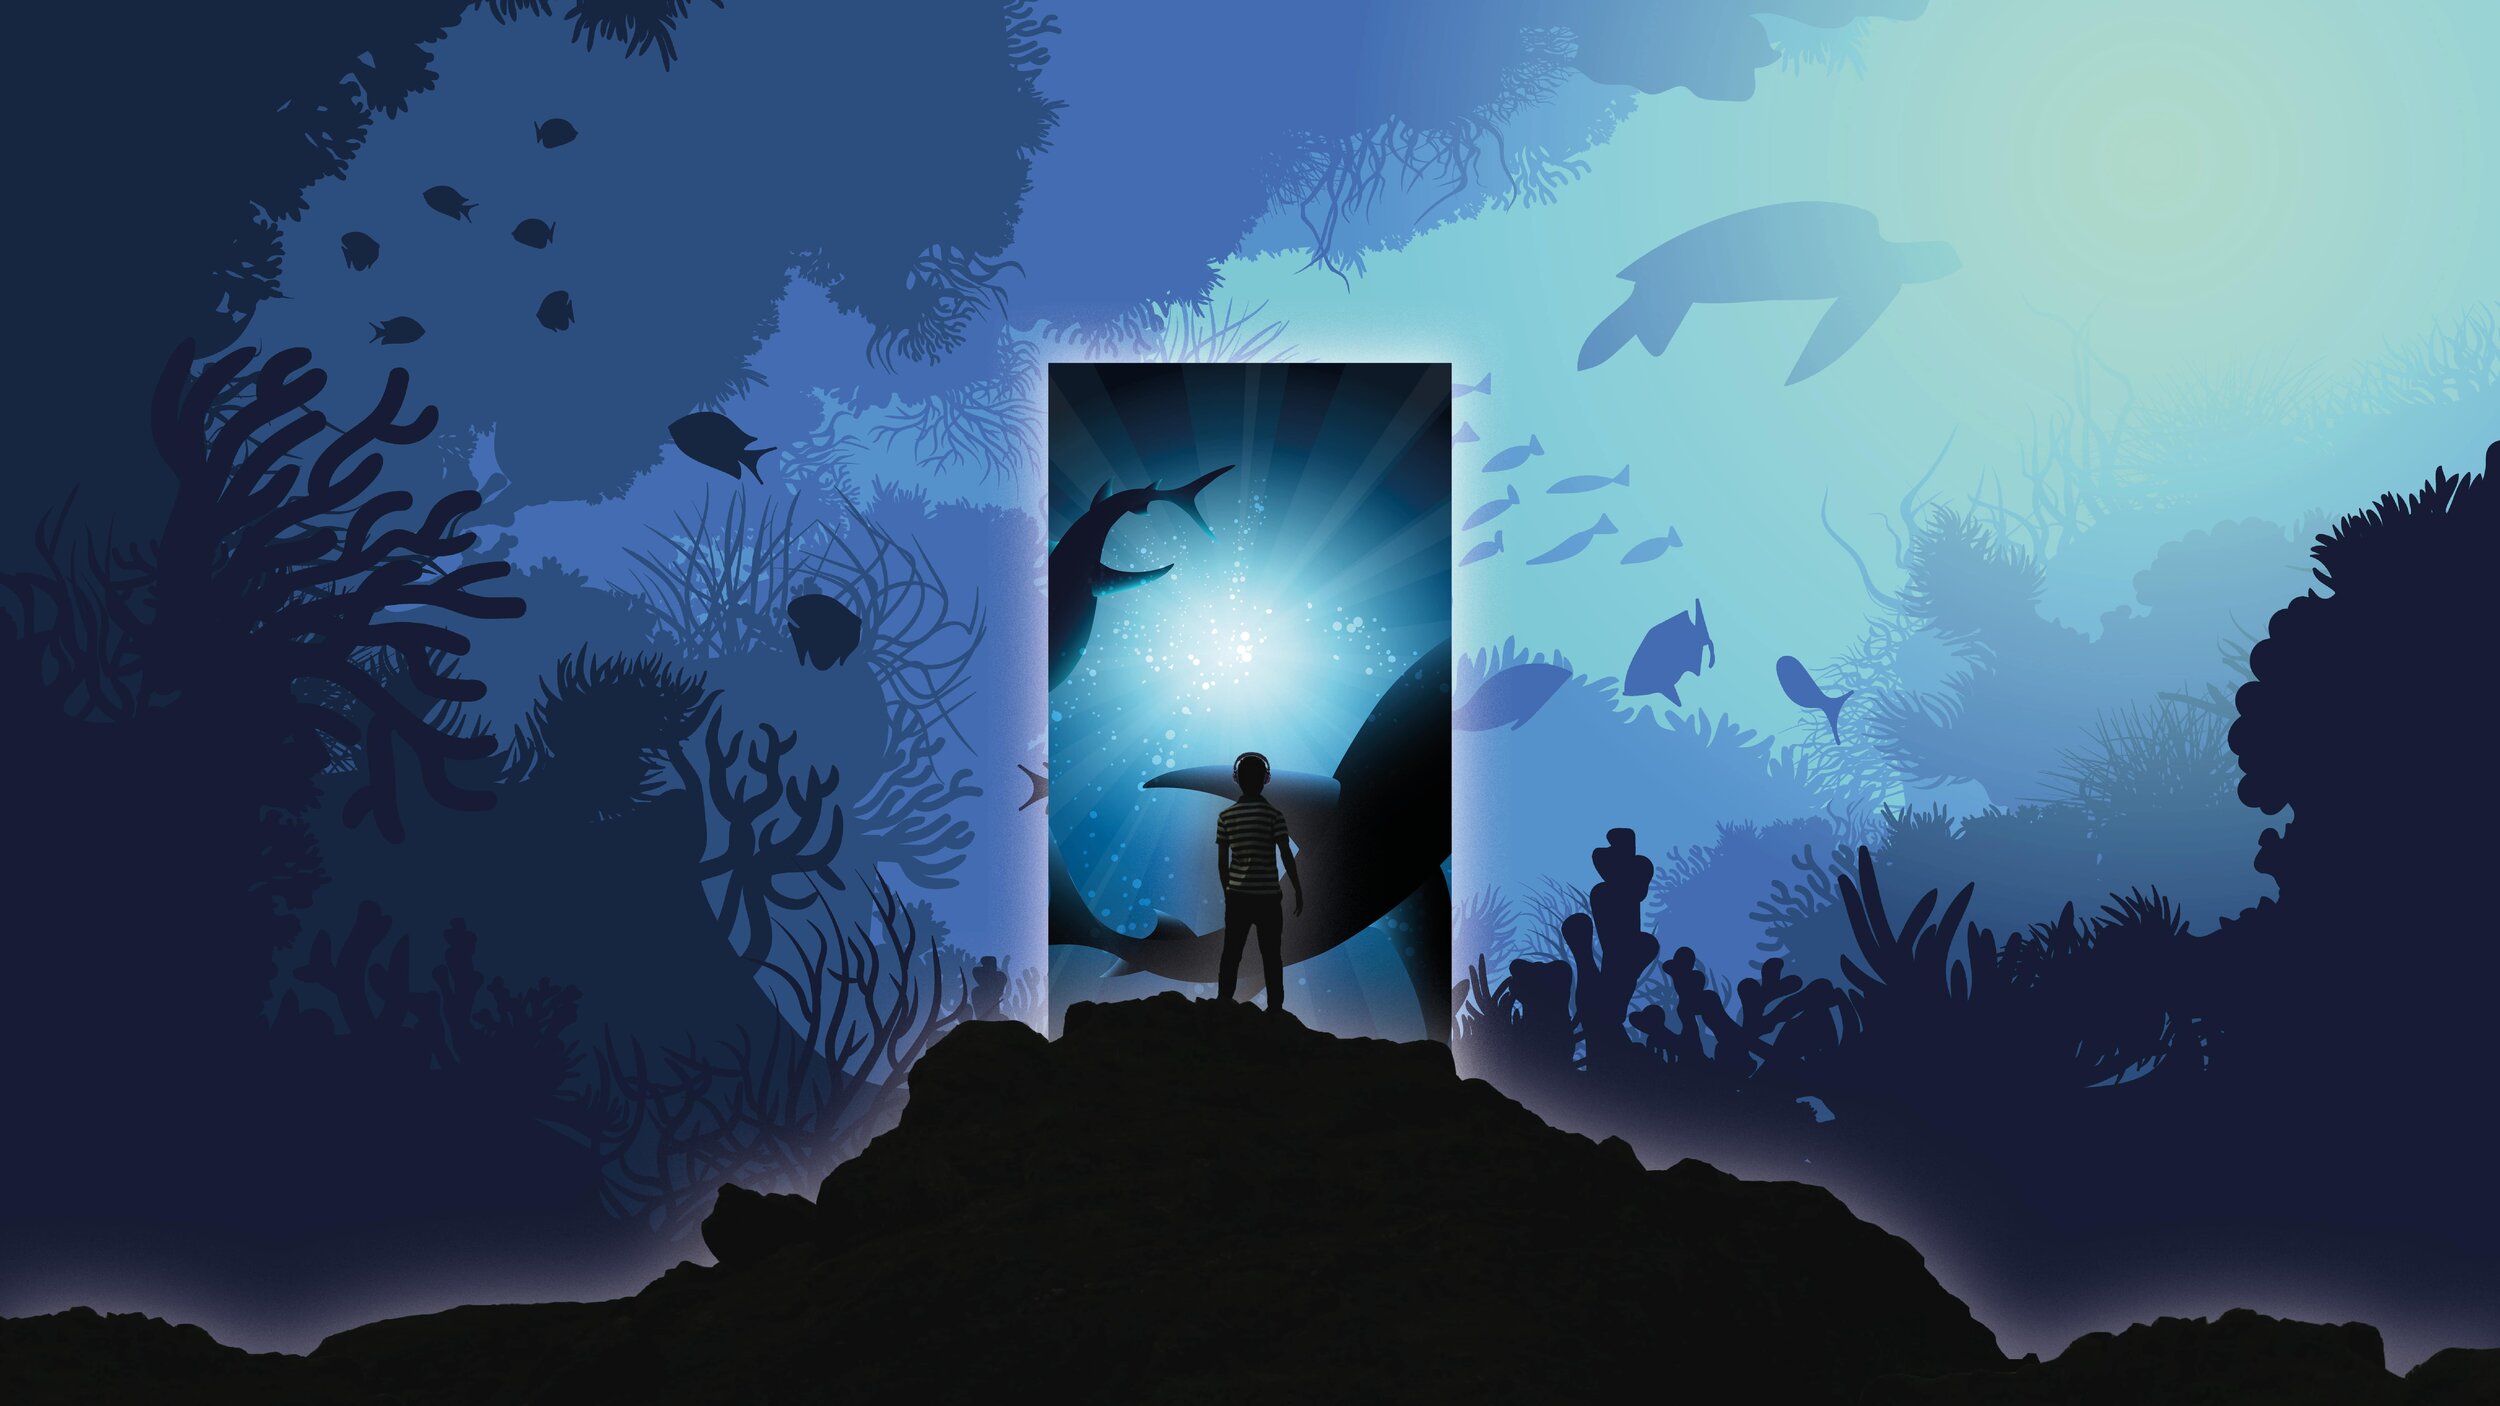 An artist's impression of a scene from the monolith Audio Experience - The Depths of the Ocean